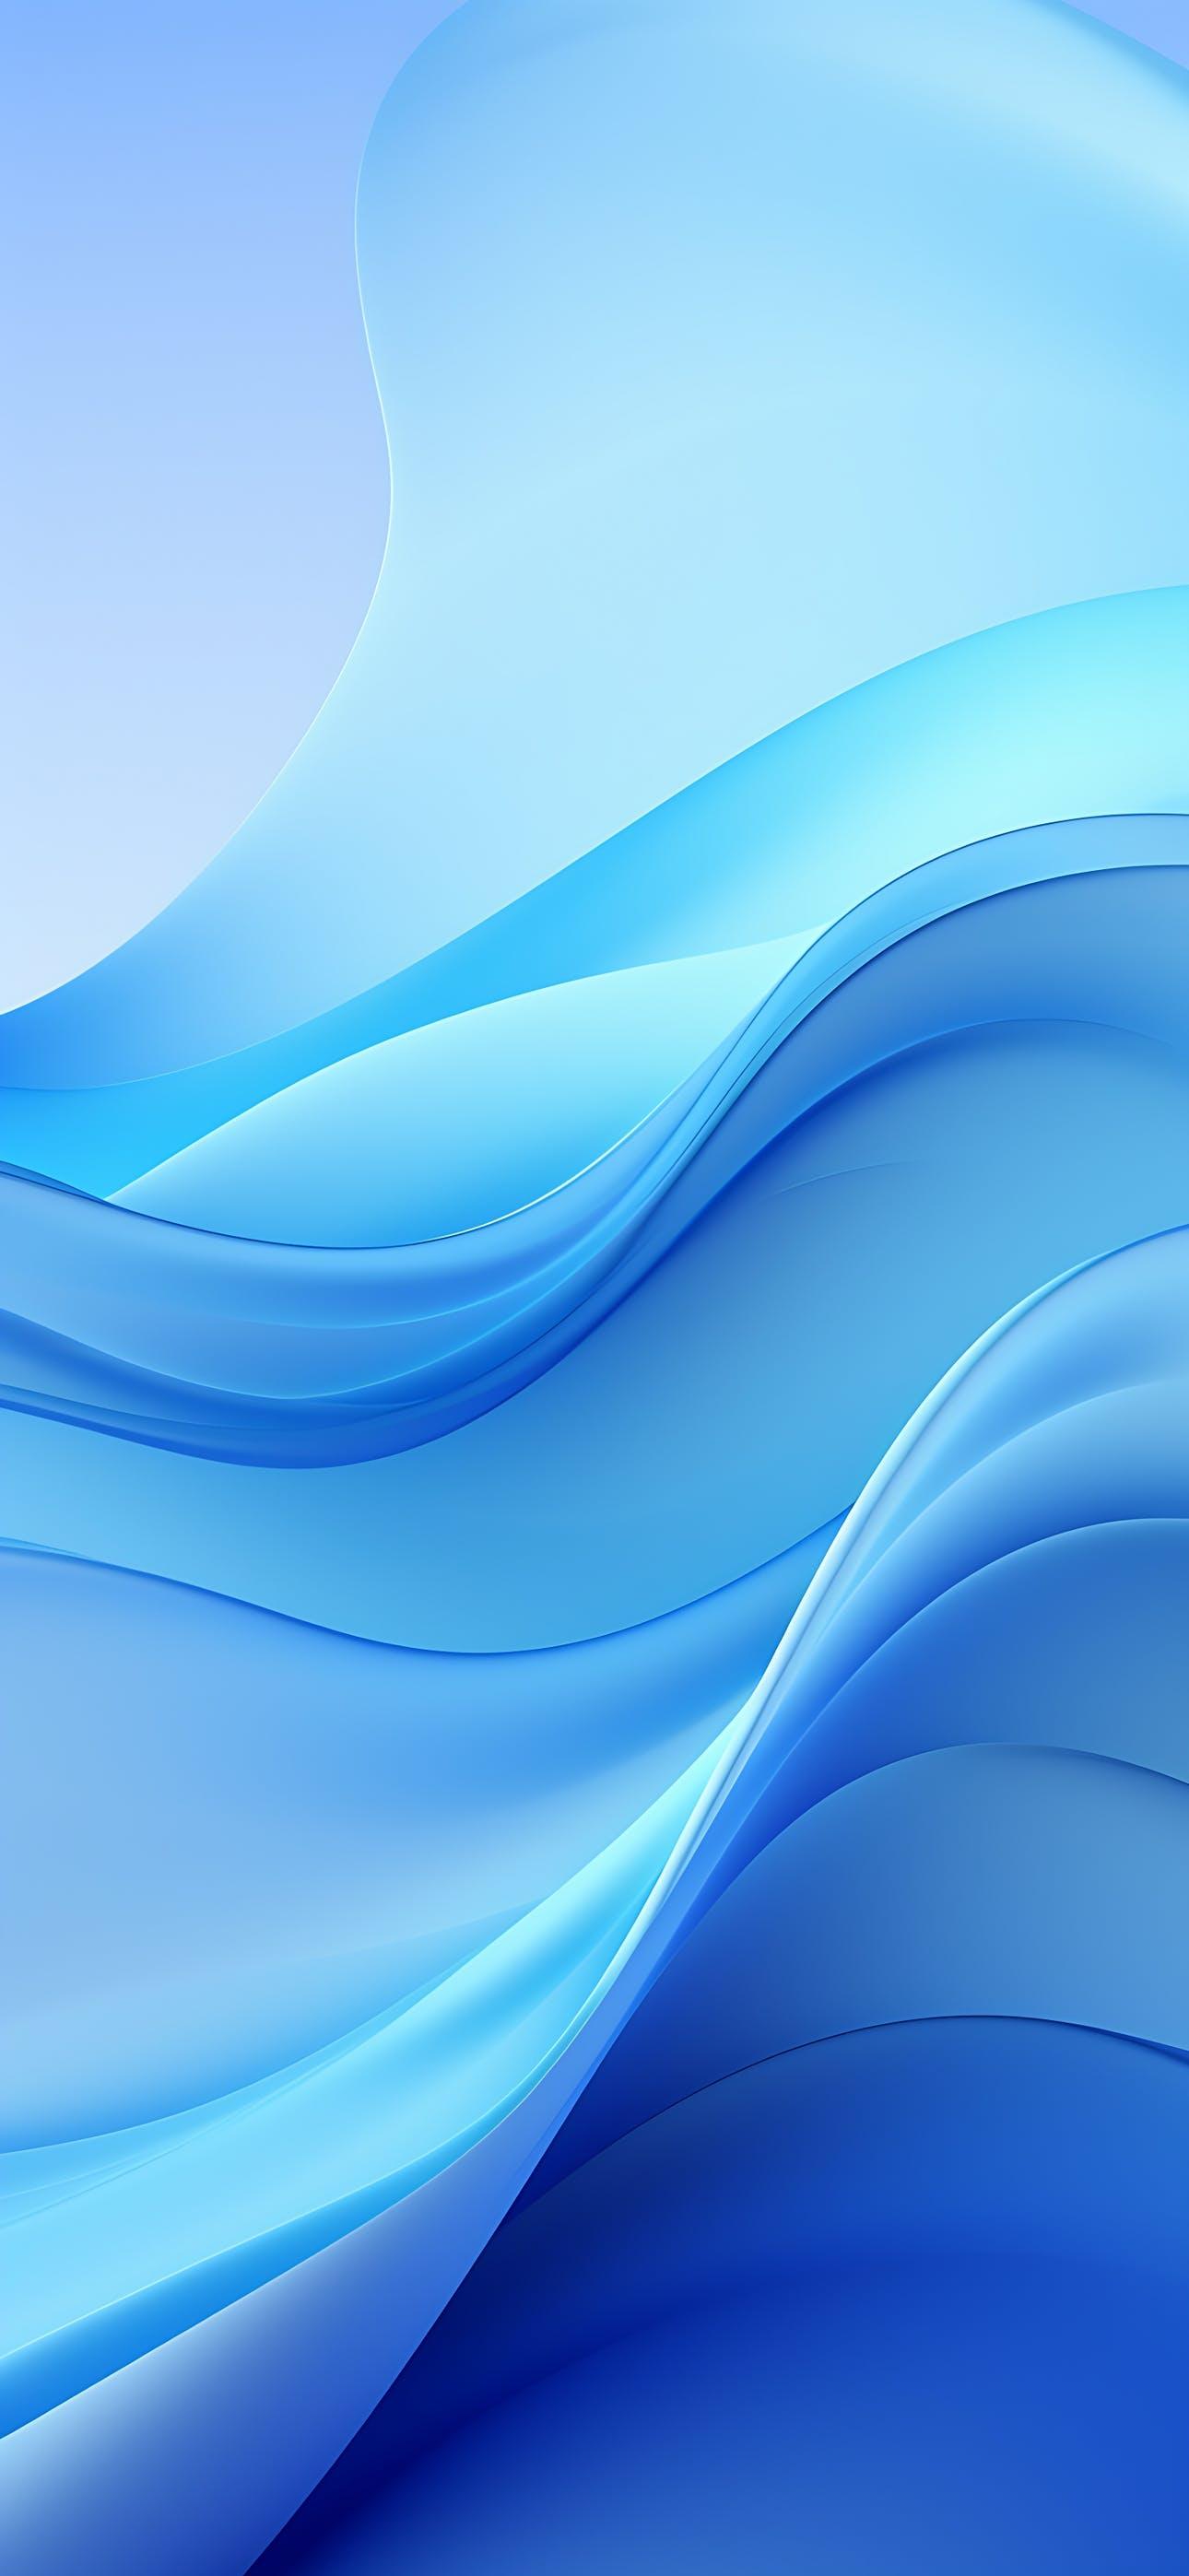 Cool Blue Gradient Wallpaper For iPhone In